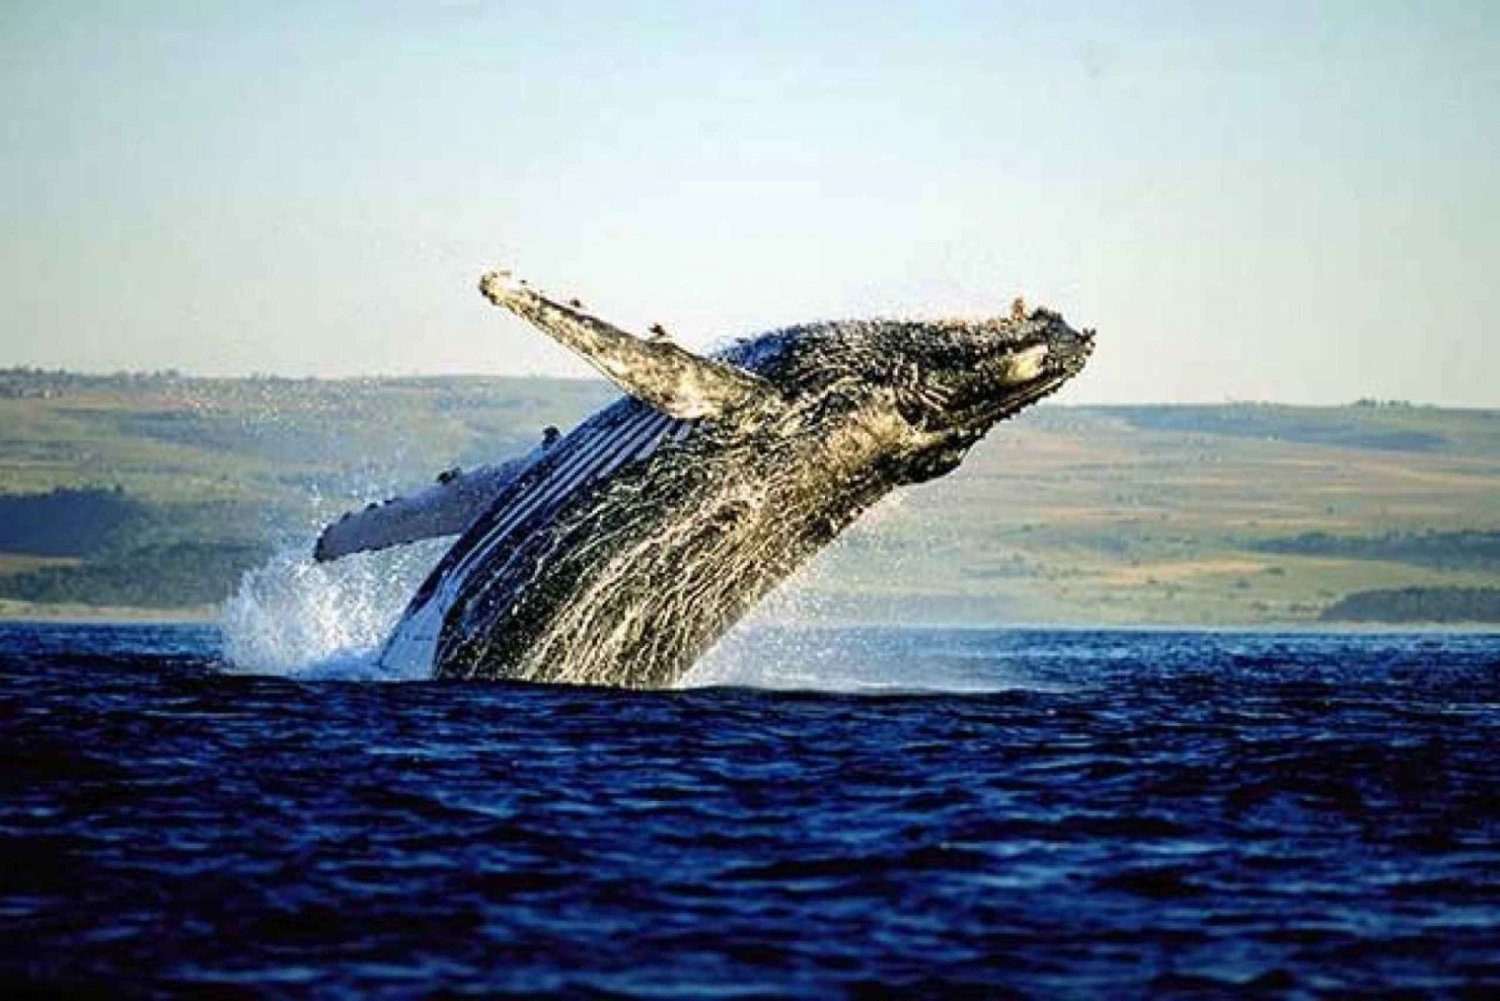 Full-day whale watching private tour in Hermanus Cape Town